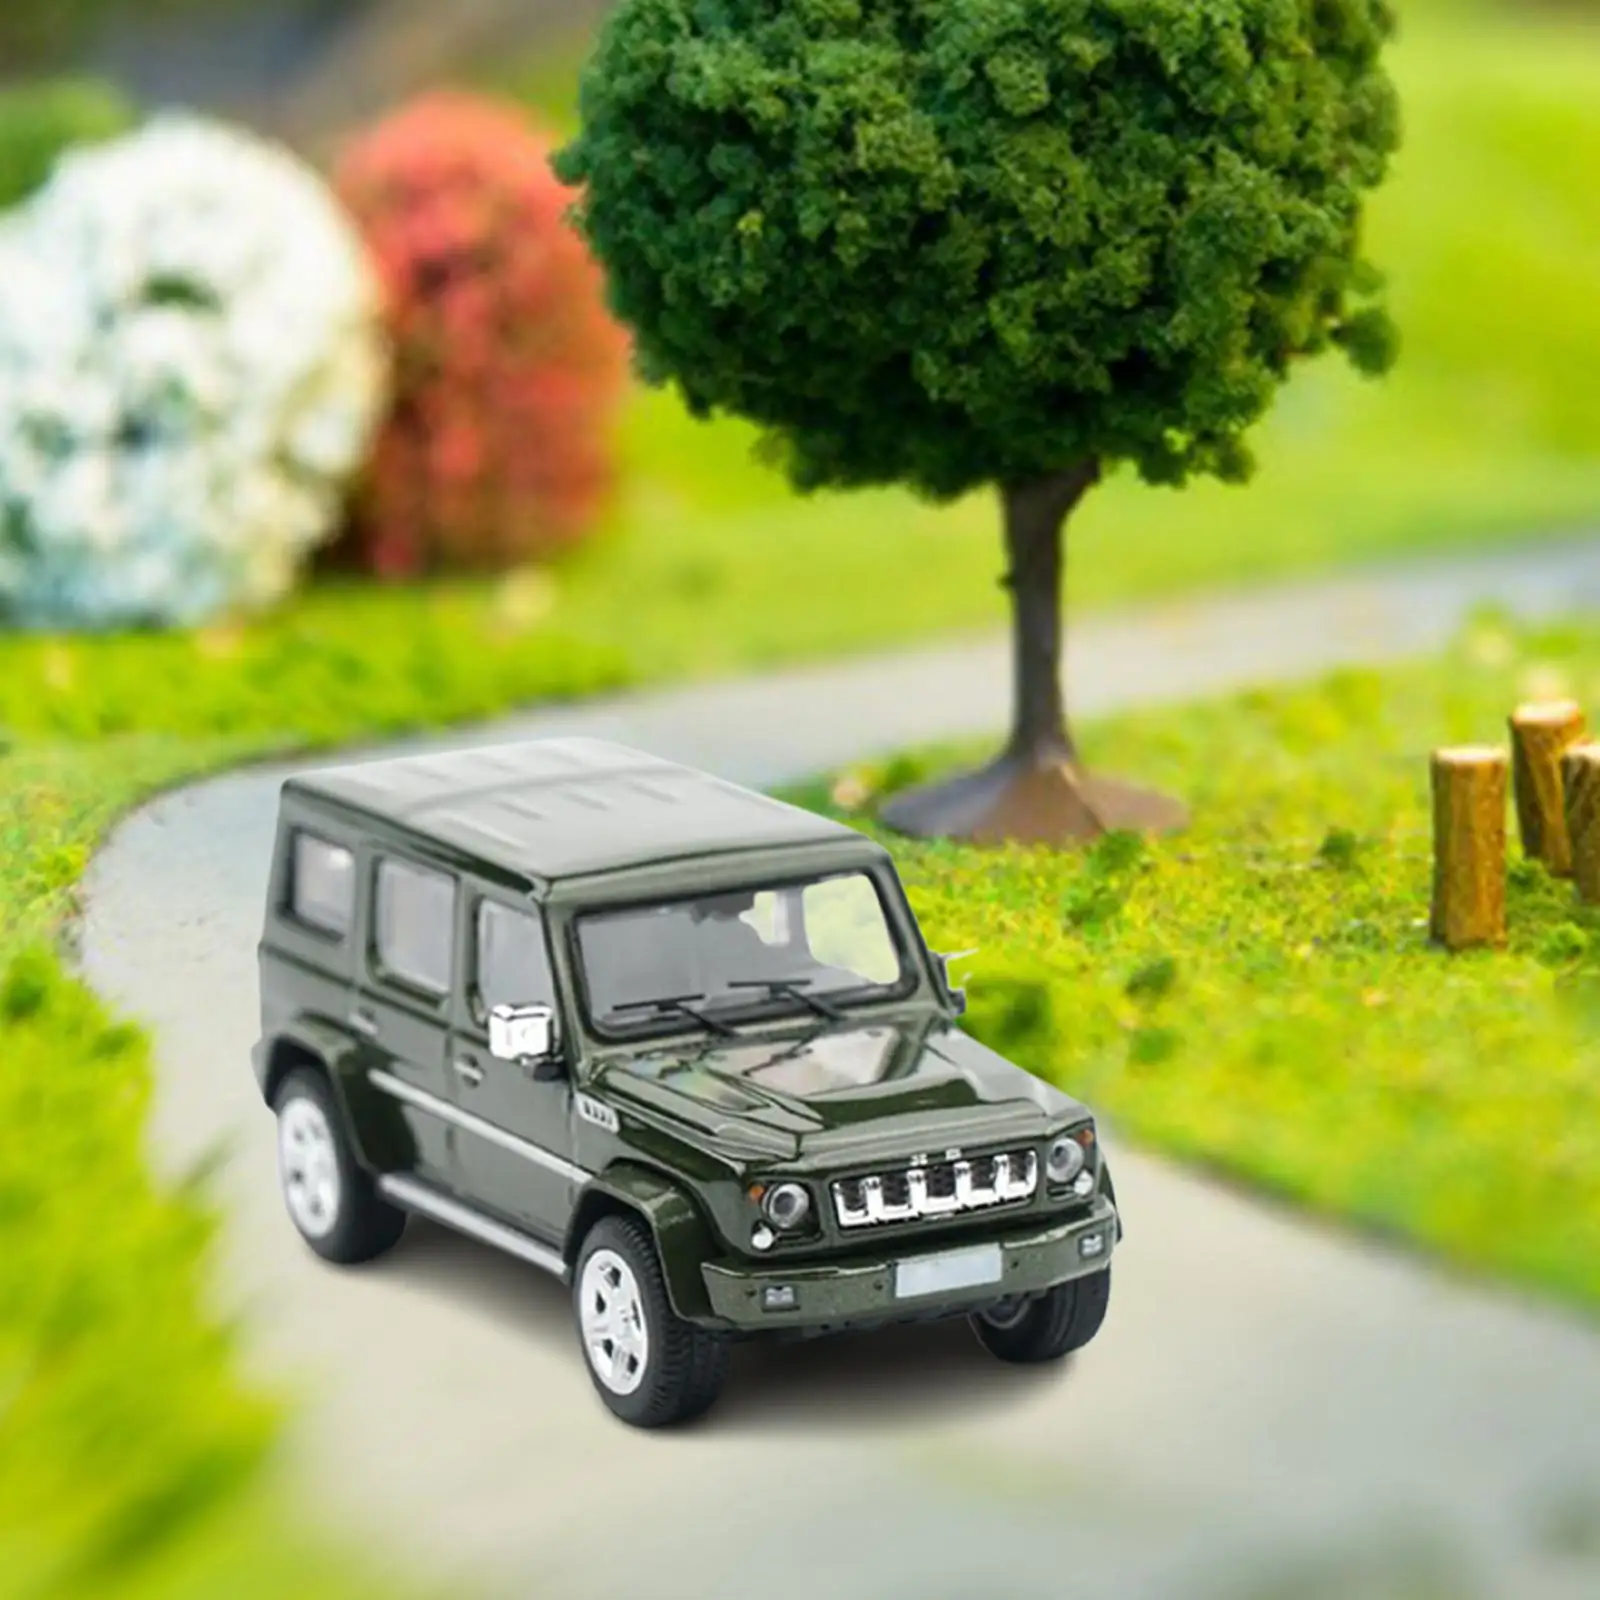 1/64 Racing Car Model Diecast Toys Desk Decoration Simulation Collection for Micro Landscapes Photography Props Dollhouse Decor